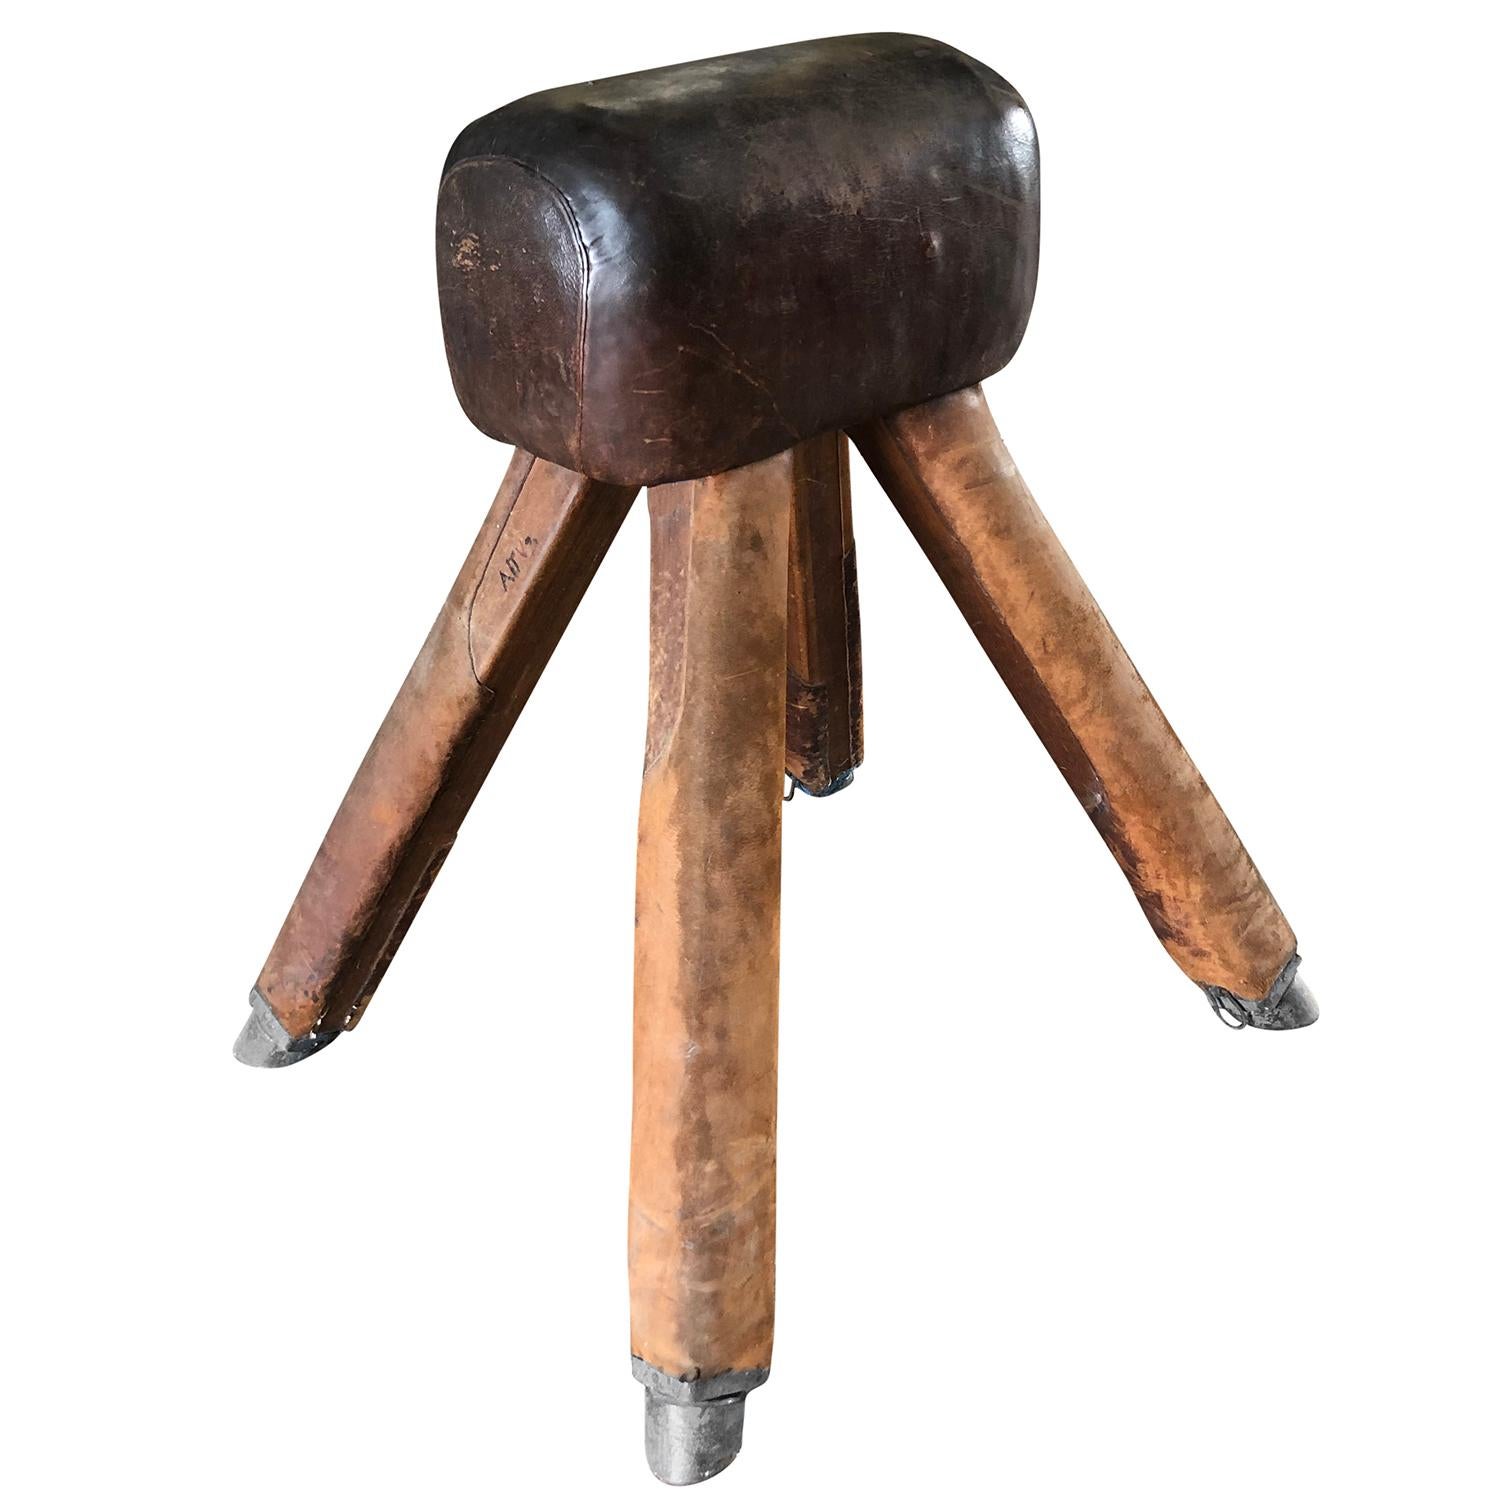 A dark-brown, vintage French artistic gymnastics apparatus or pommel horse with solid wooden legs and a leather covered sitting saddle, in good condition with patina. The legs of the pommel horse are supported by four metal feet. Wear consistent